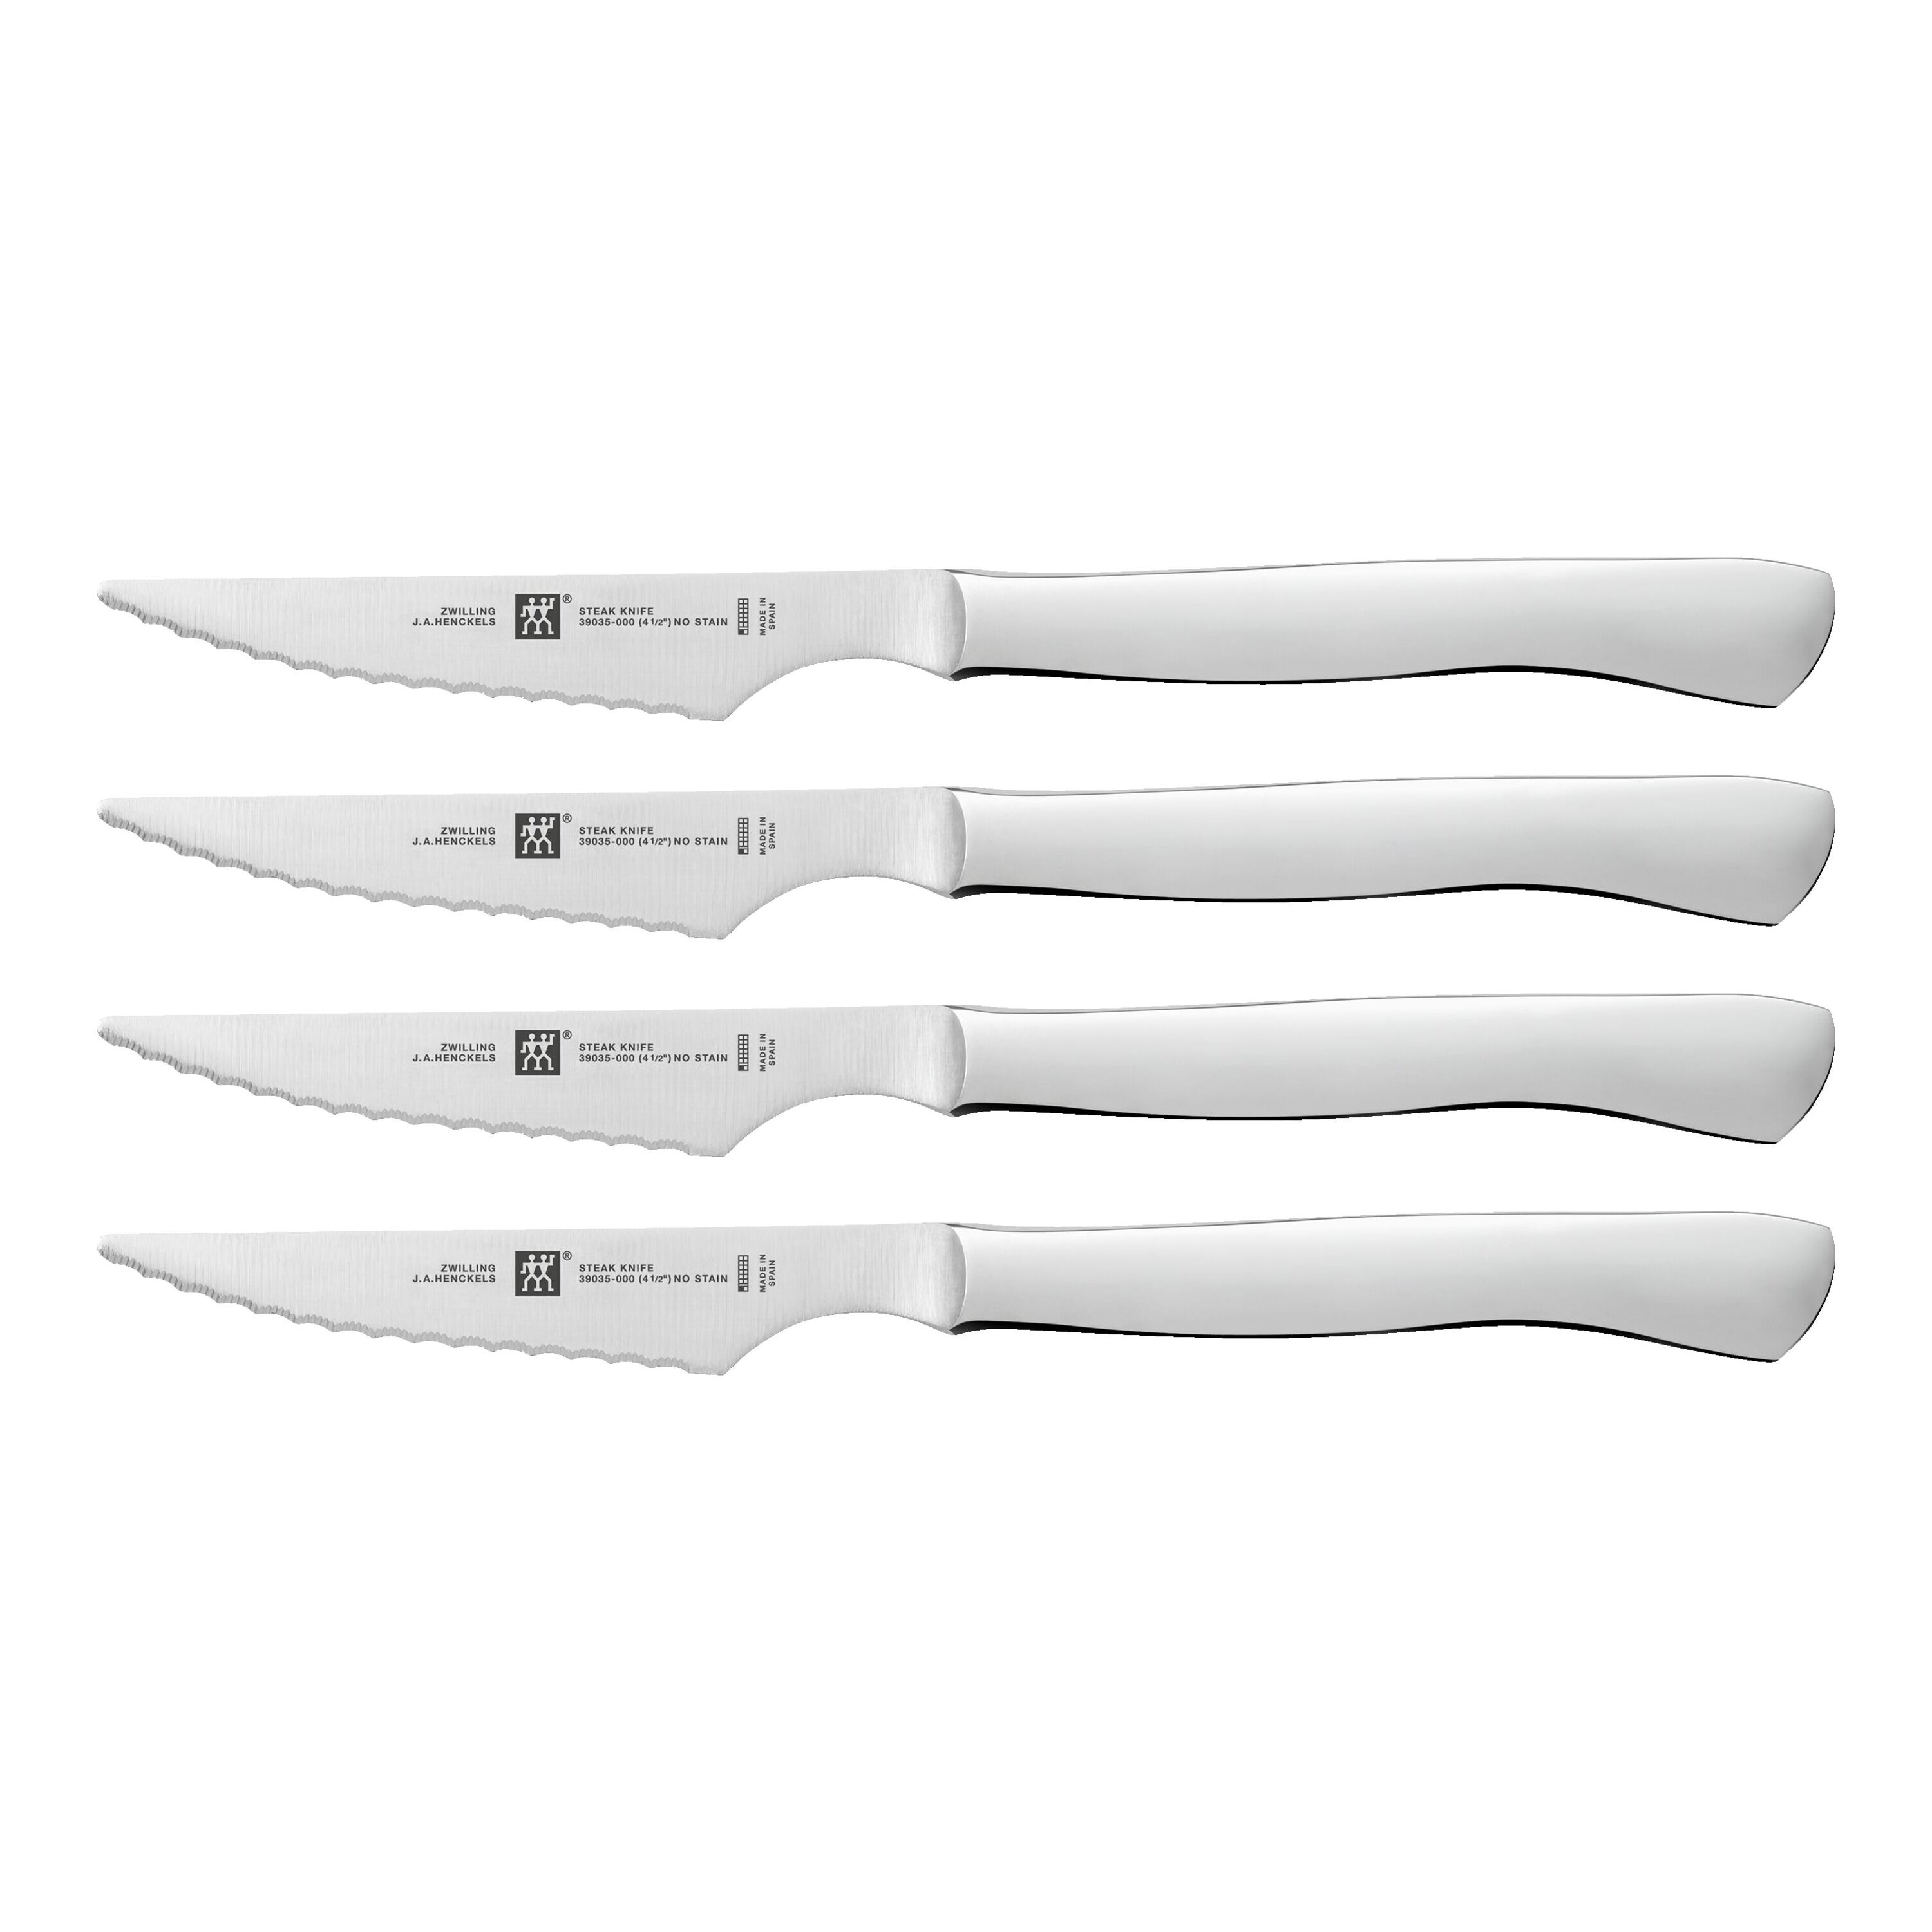 ZWILLING 4-pc Stainless Steel Serrated Steak Knife Set - Stainless Steel -  Bed Bath & Beyond - 24226272